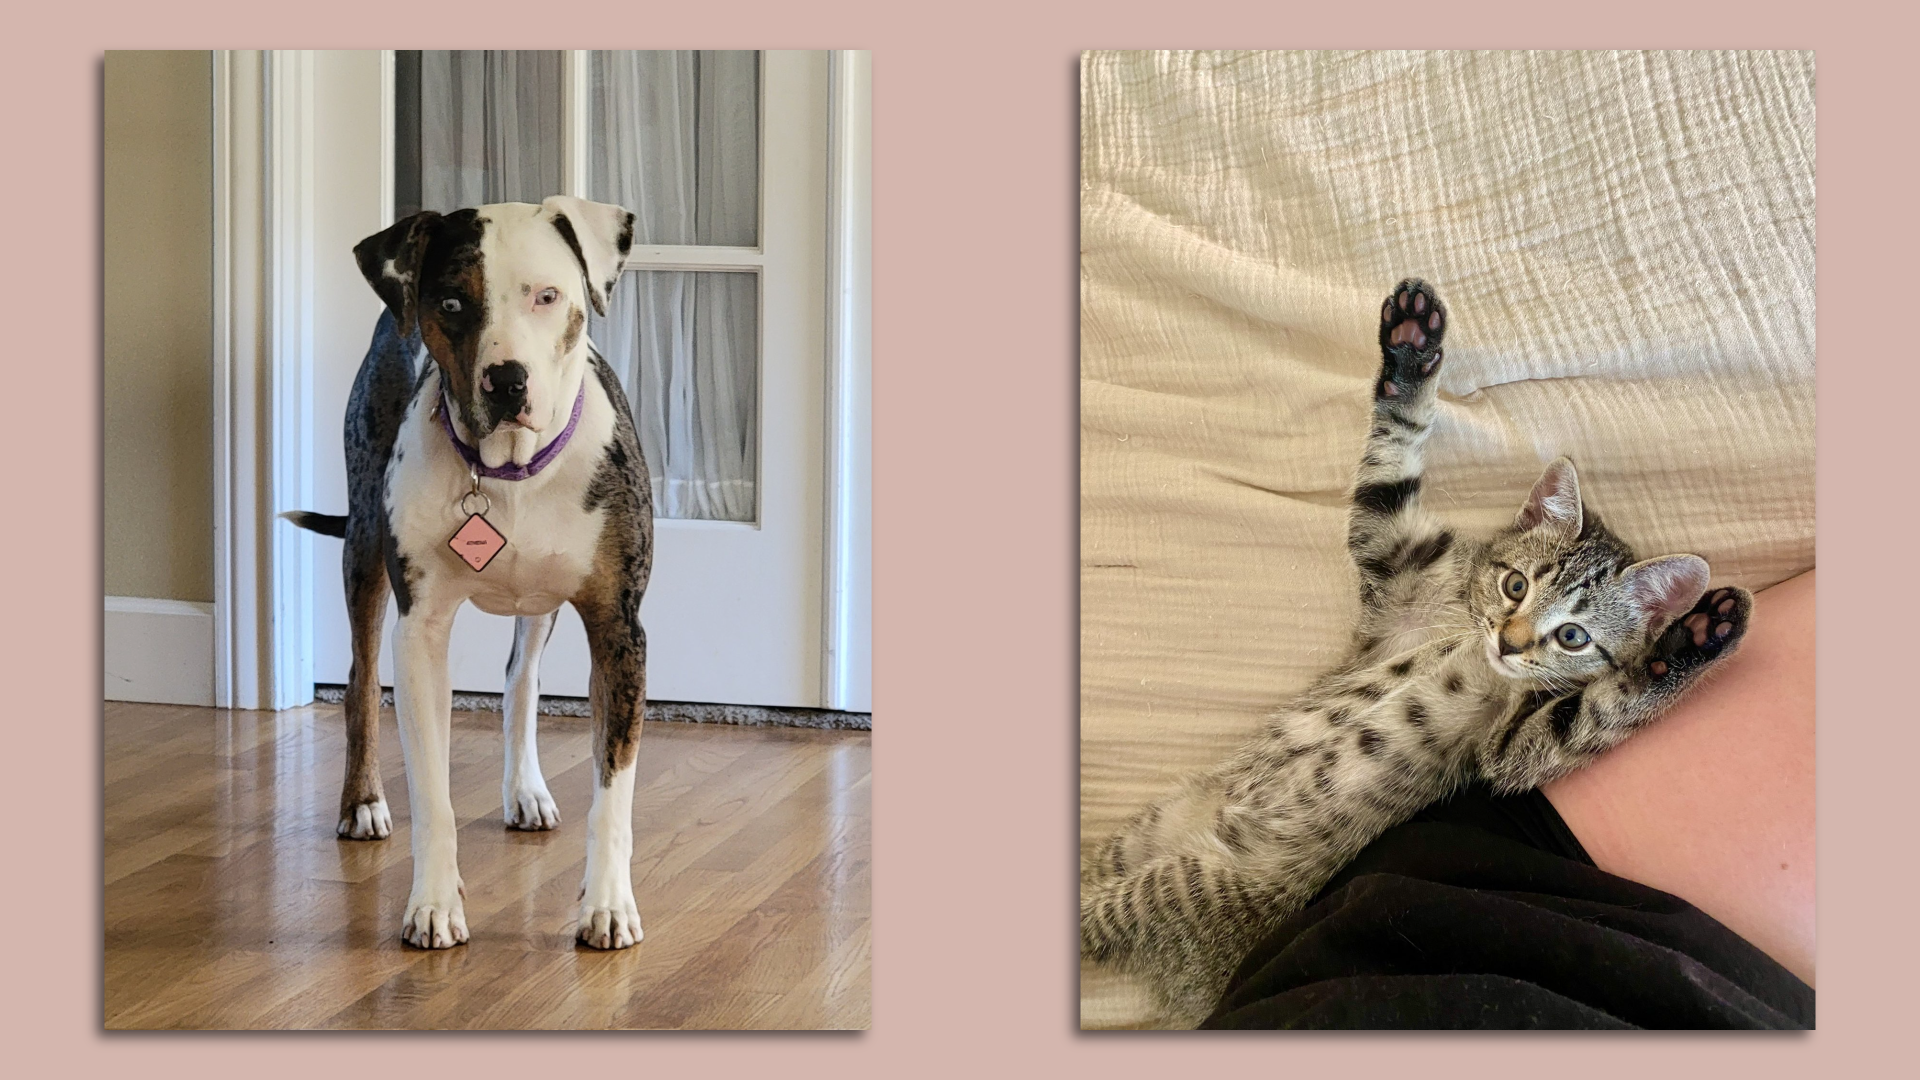 Photos of Codebook readers' dogs and kittens